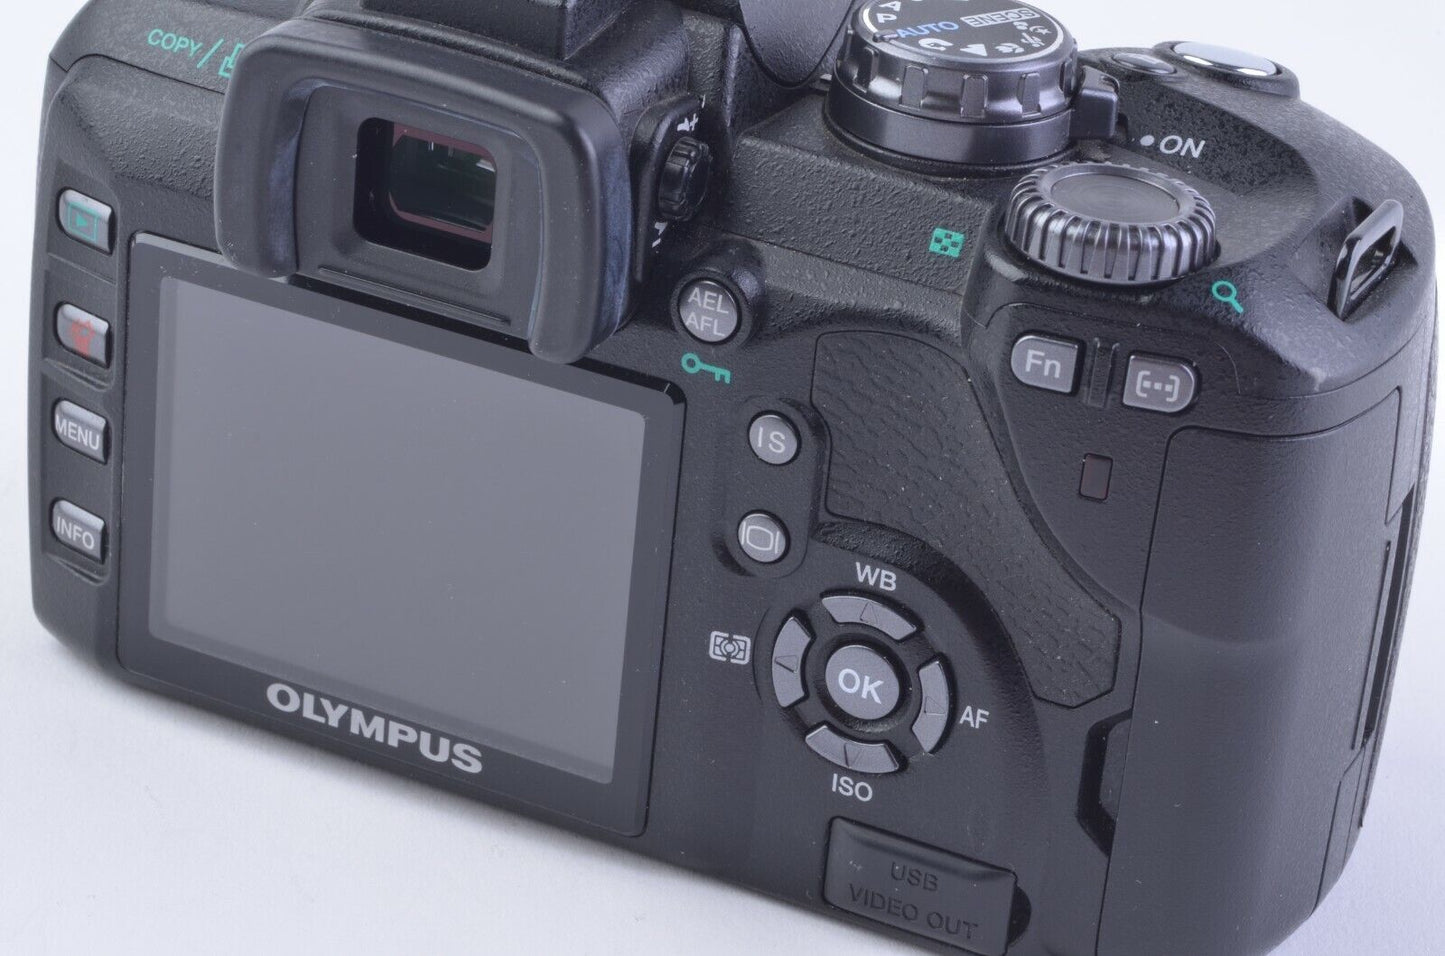 EXC+++ OLYMPUS E-510 665nm INFRARED CONVERTED BODY, 2BATTS, CHARGER, VERY CLEAN